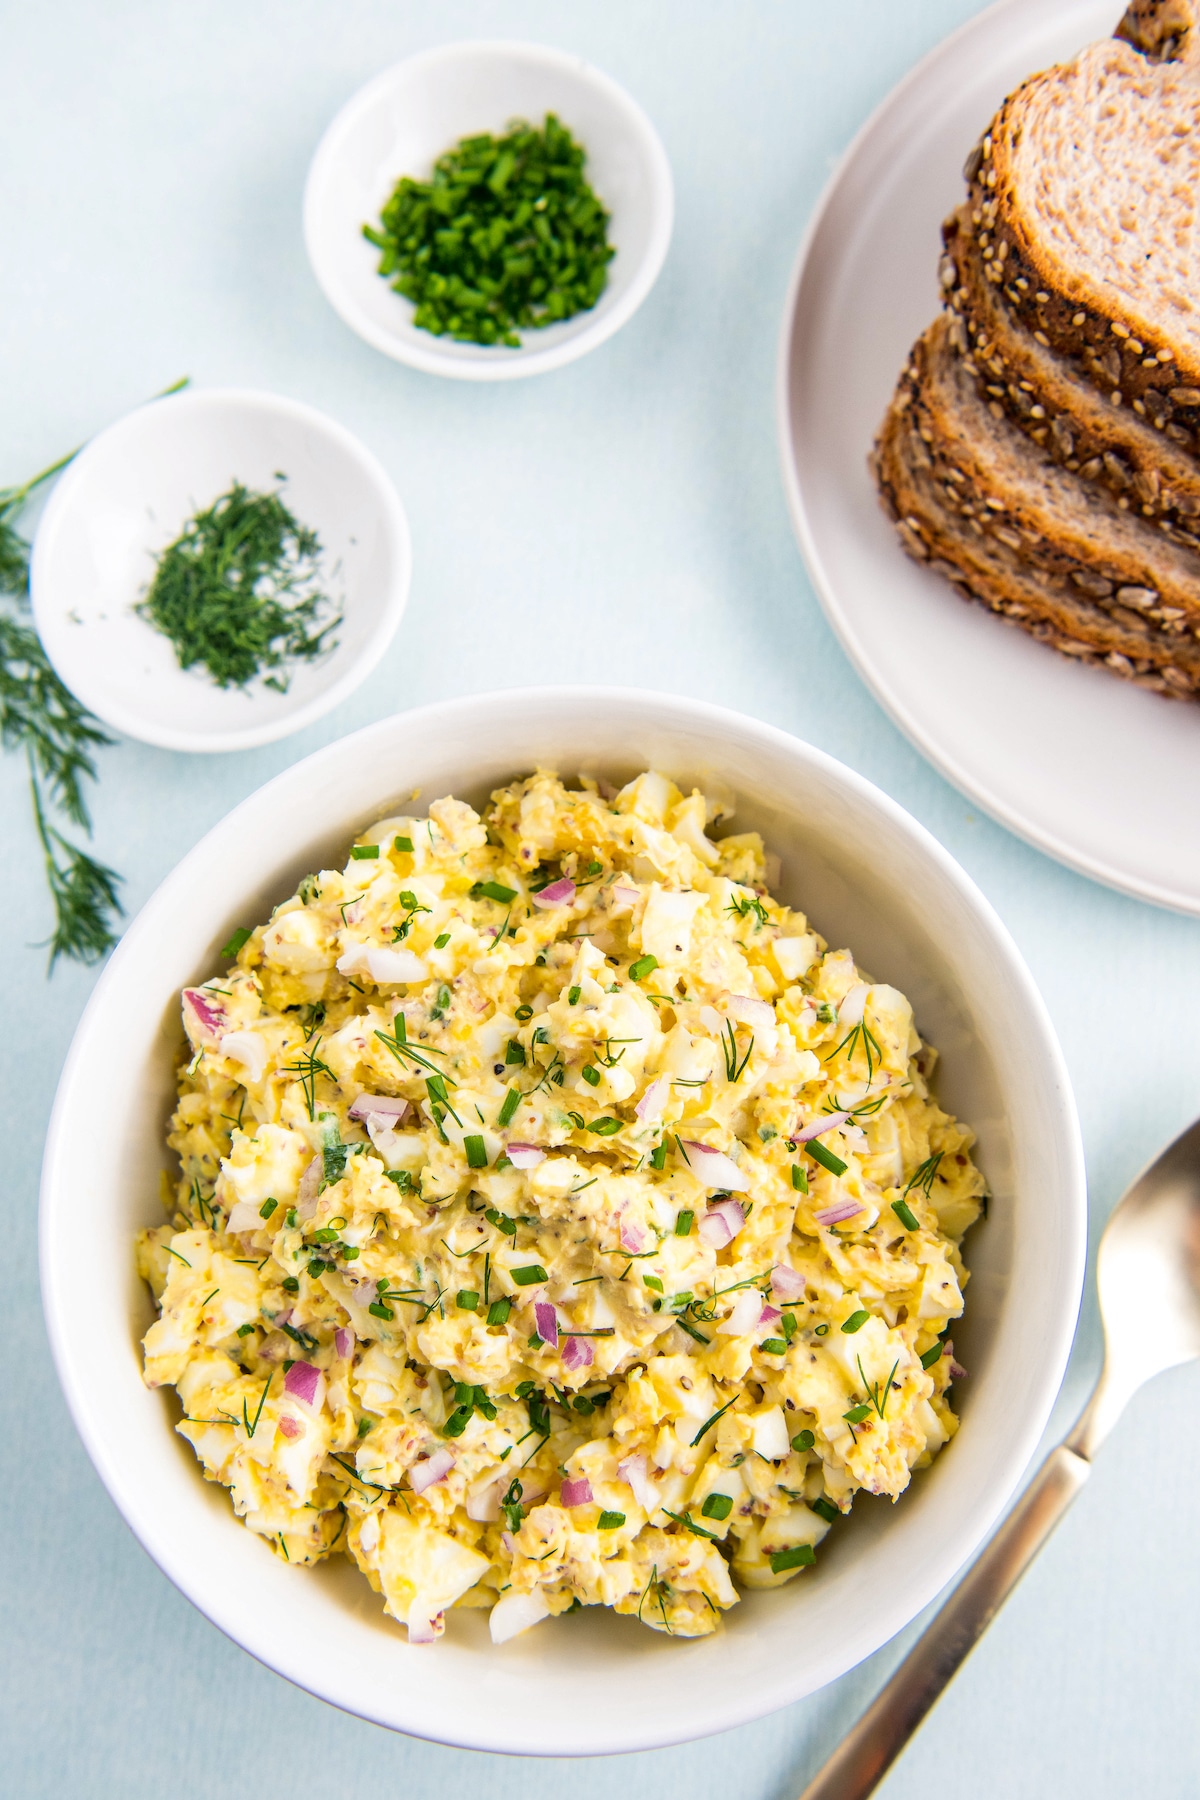 Egg salad in a bowl with a plate of bread.